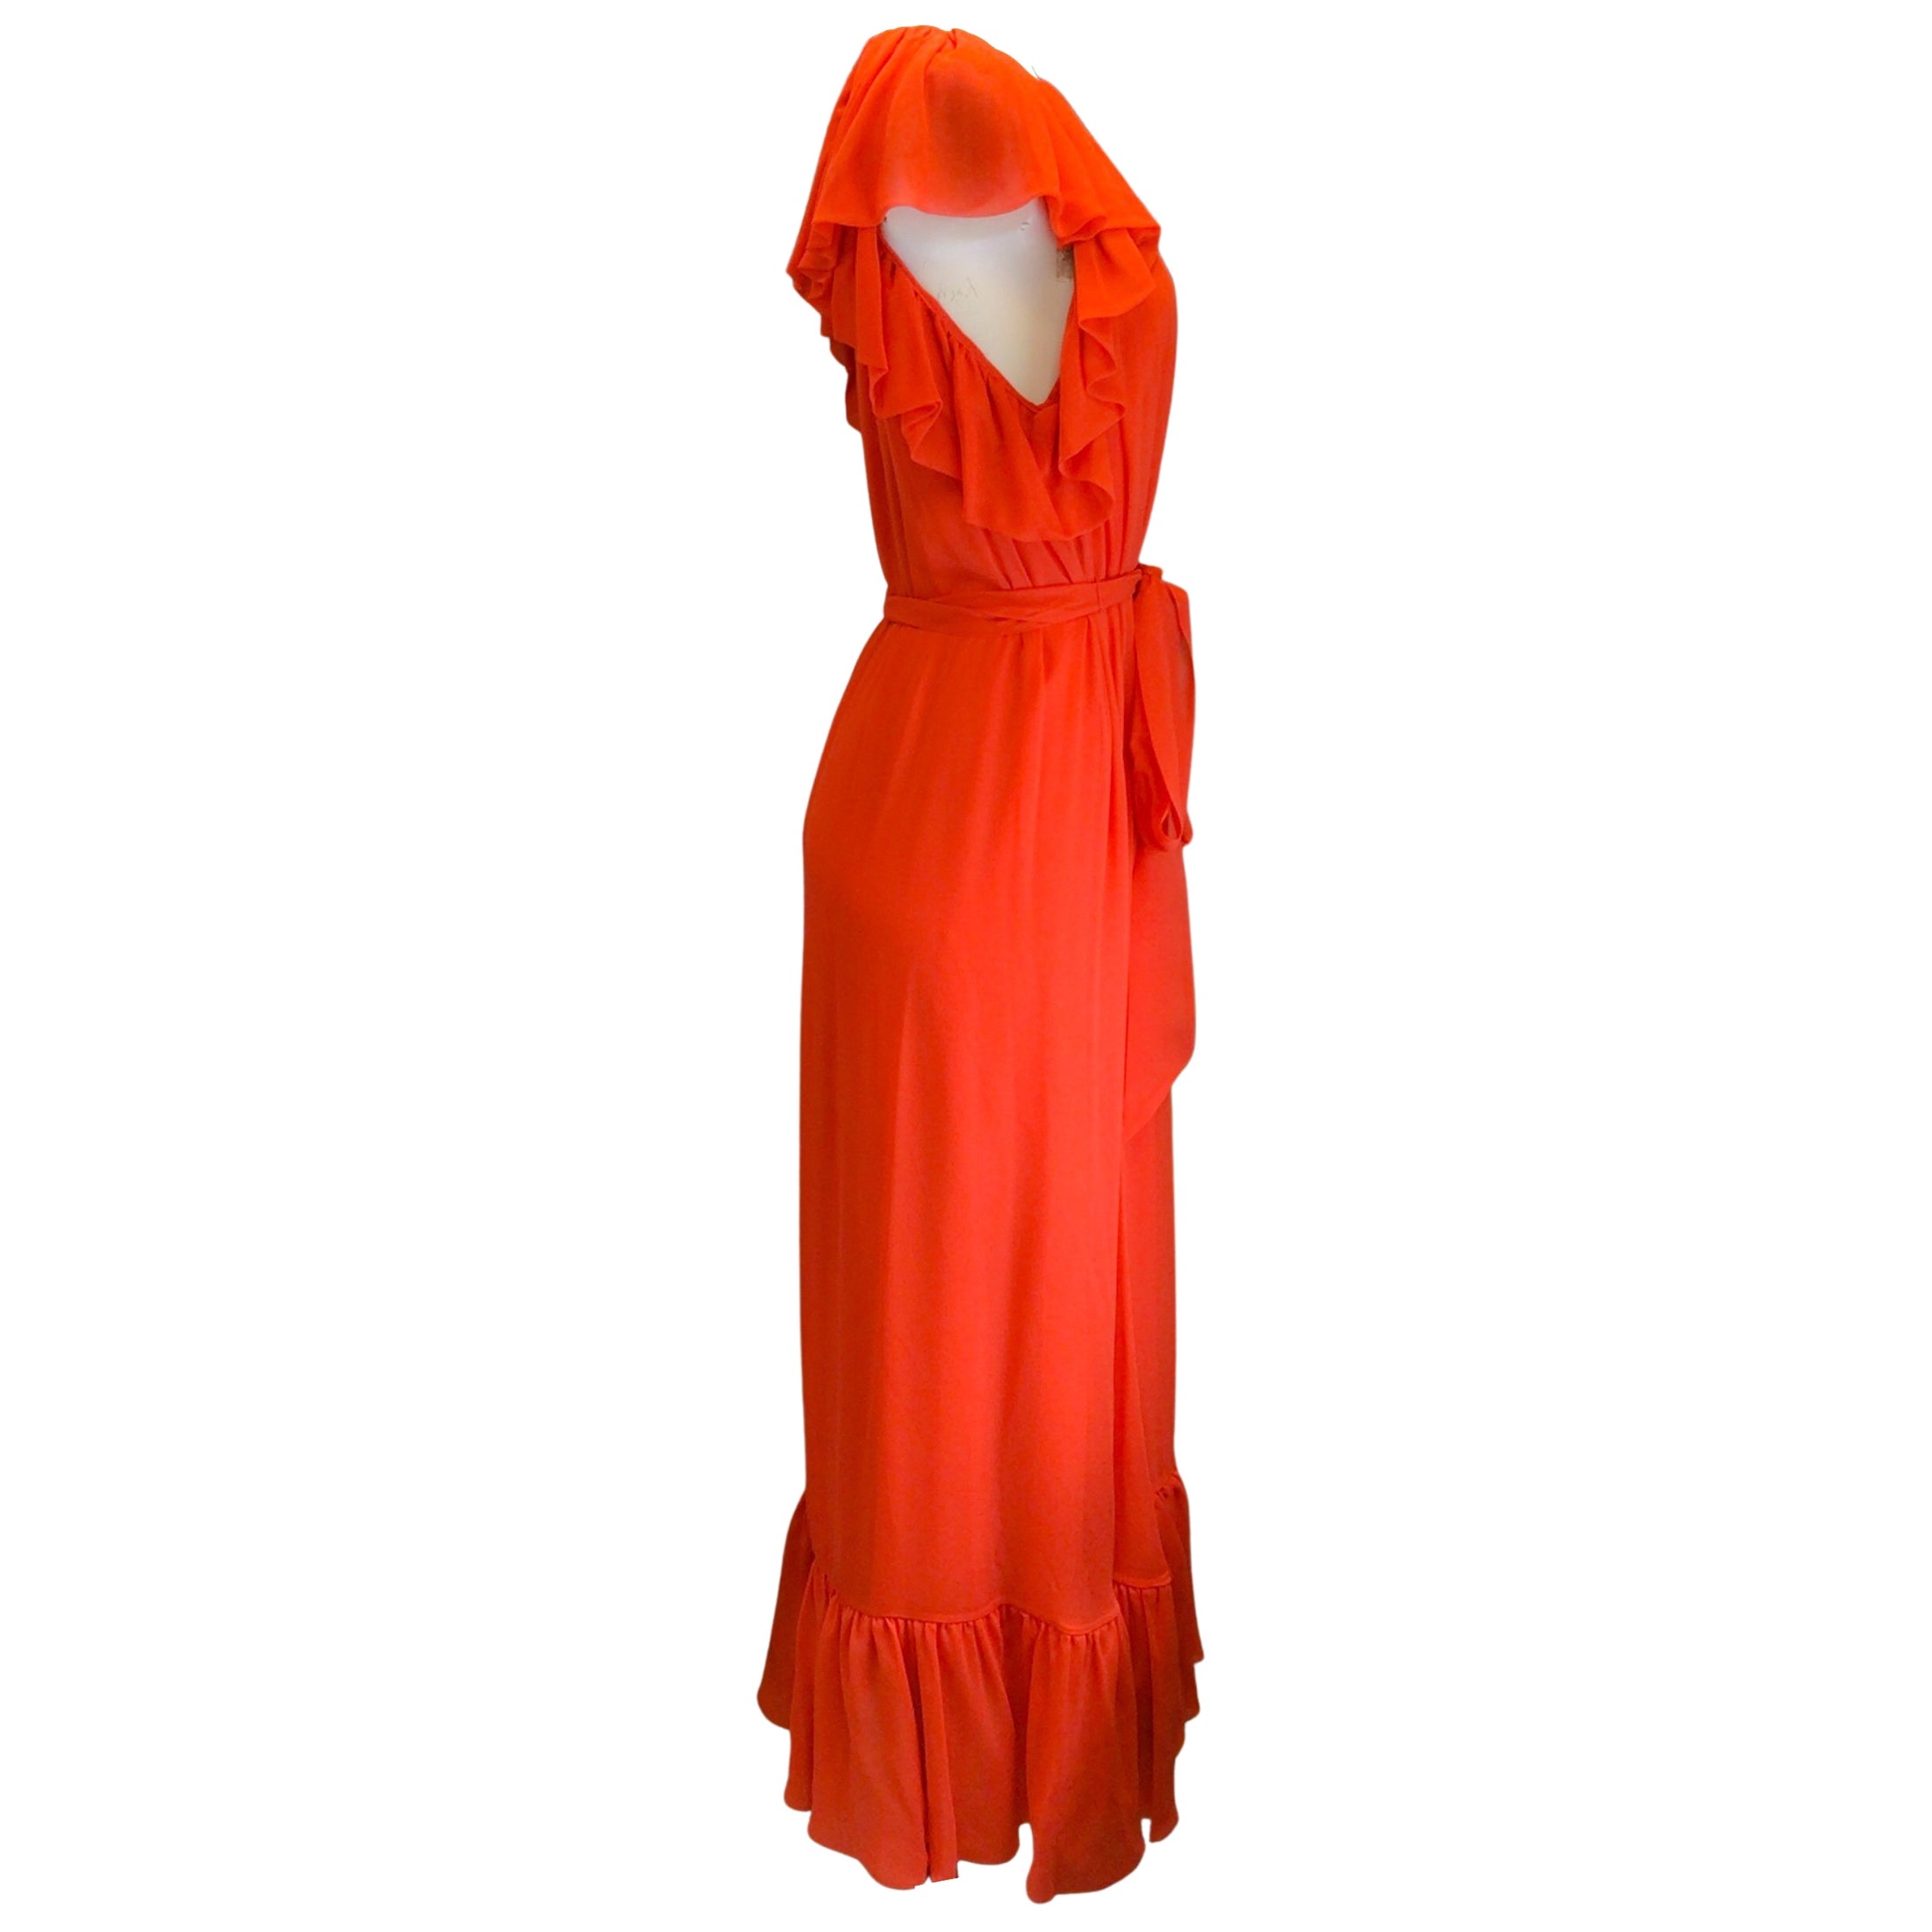 Monique Lhuillier Collection Poppy Red Ruffled Detail Belted Silk Maxi Dress